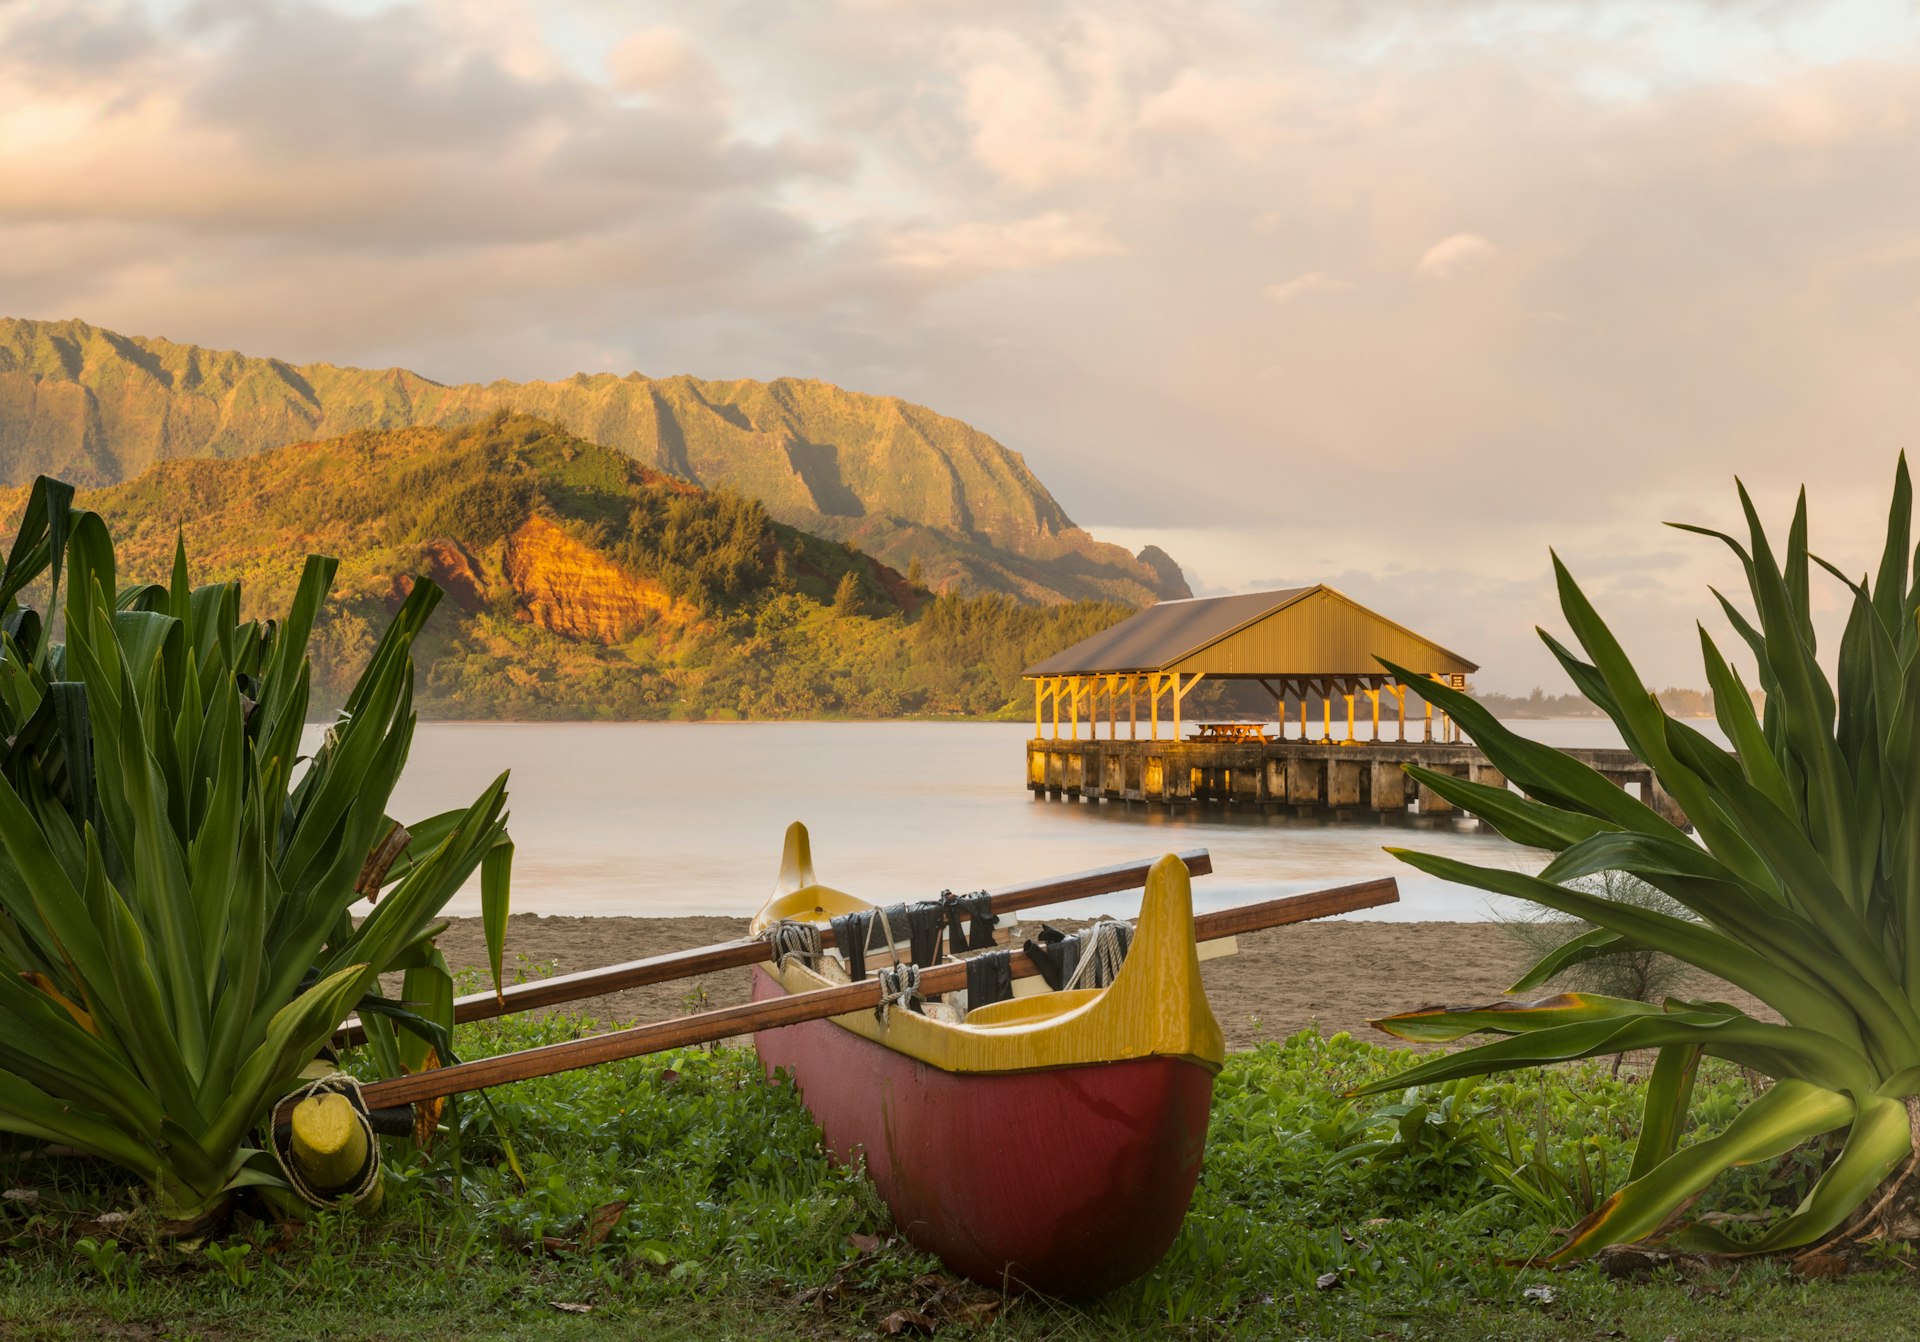 A wooden canoe sits on the edge of a beach with a covered pier, backed by mountains